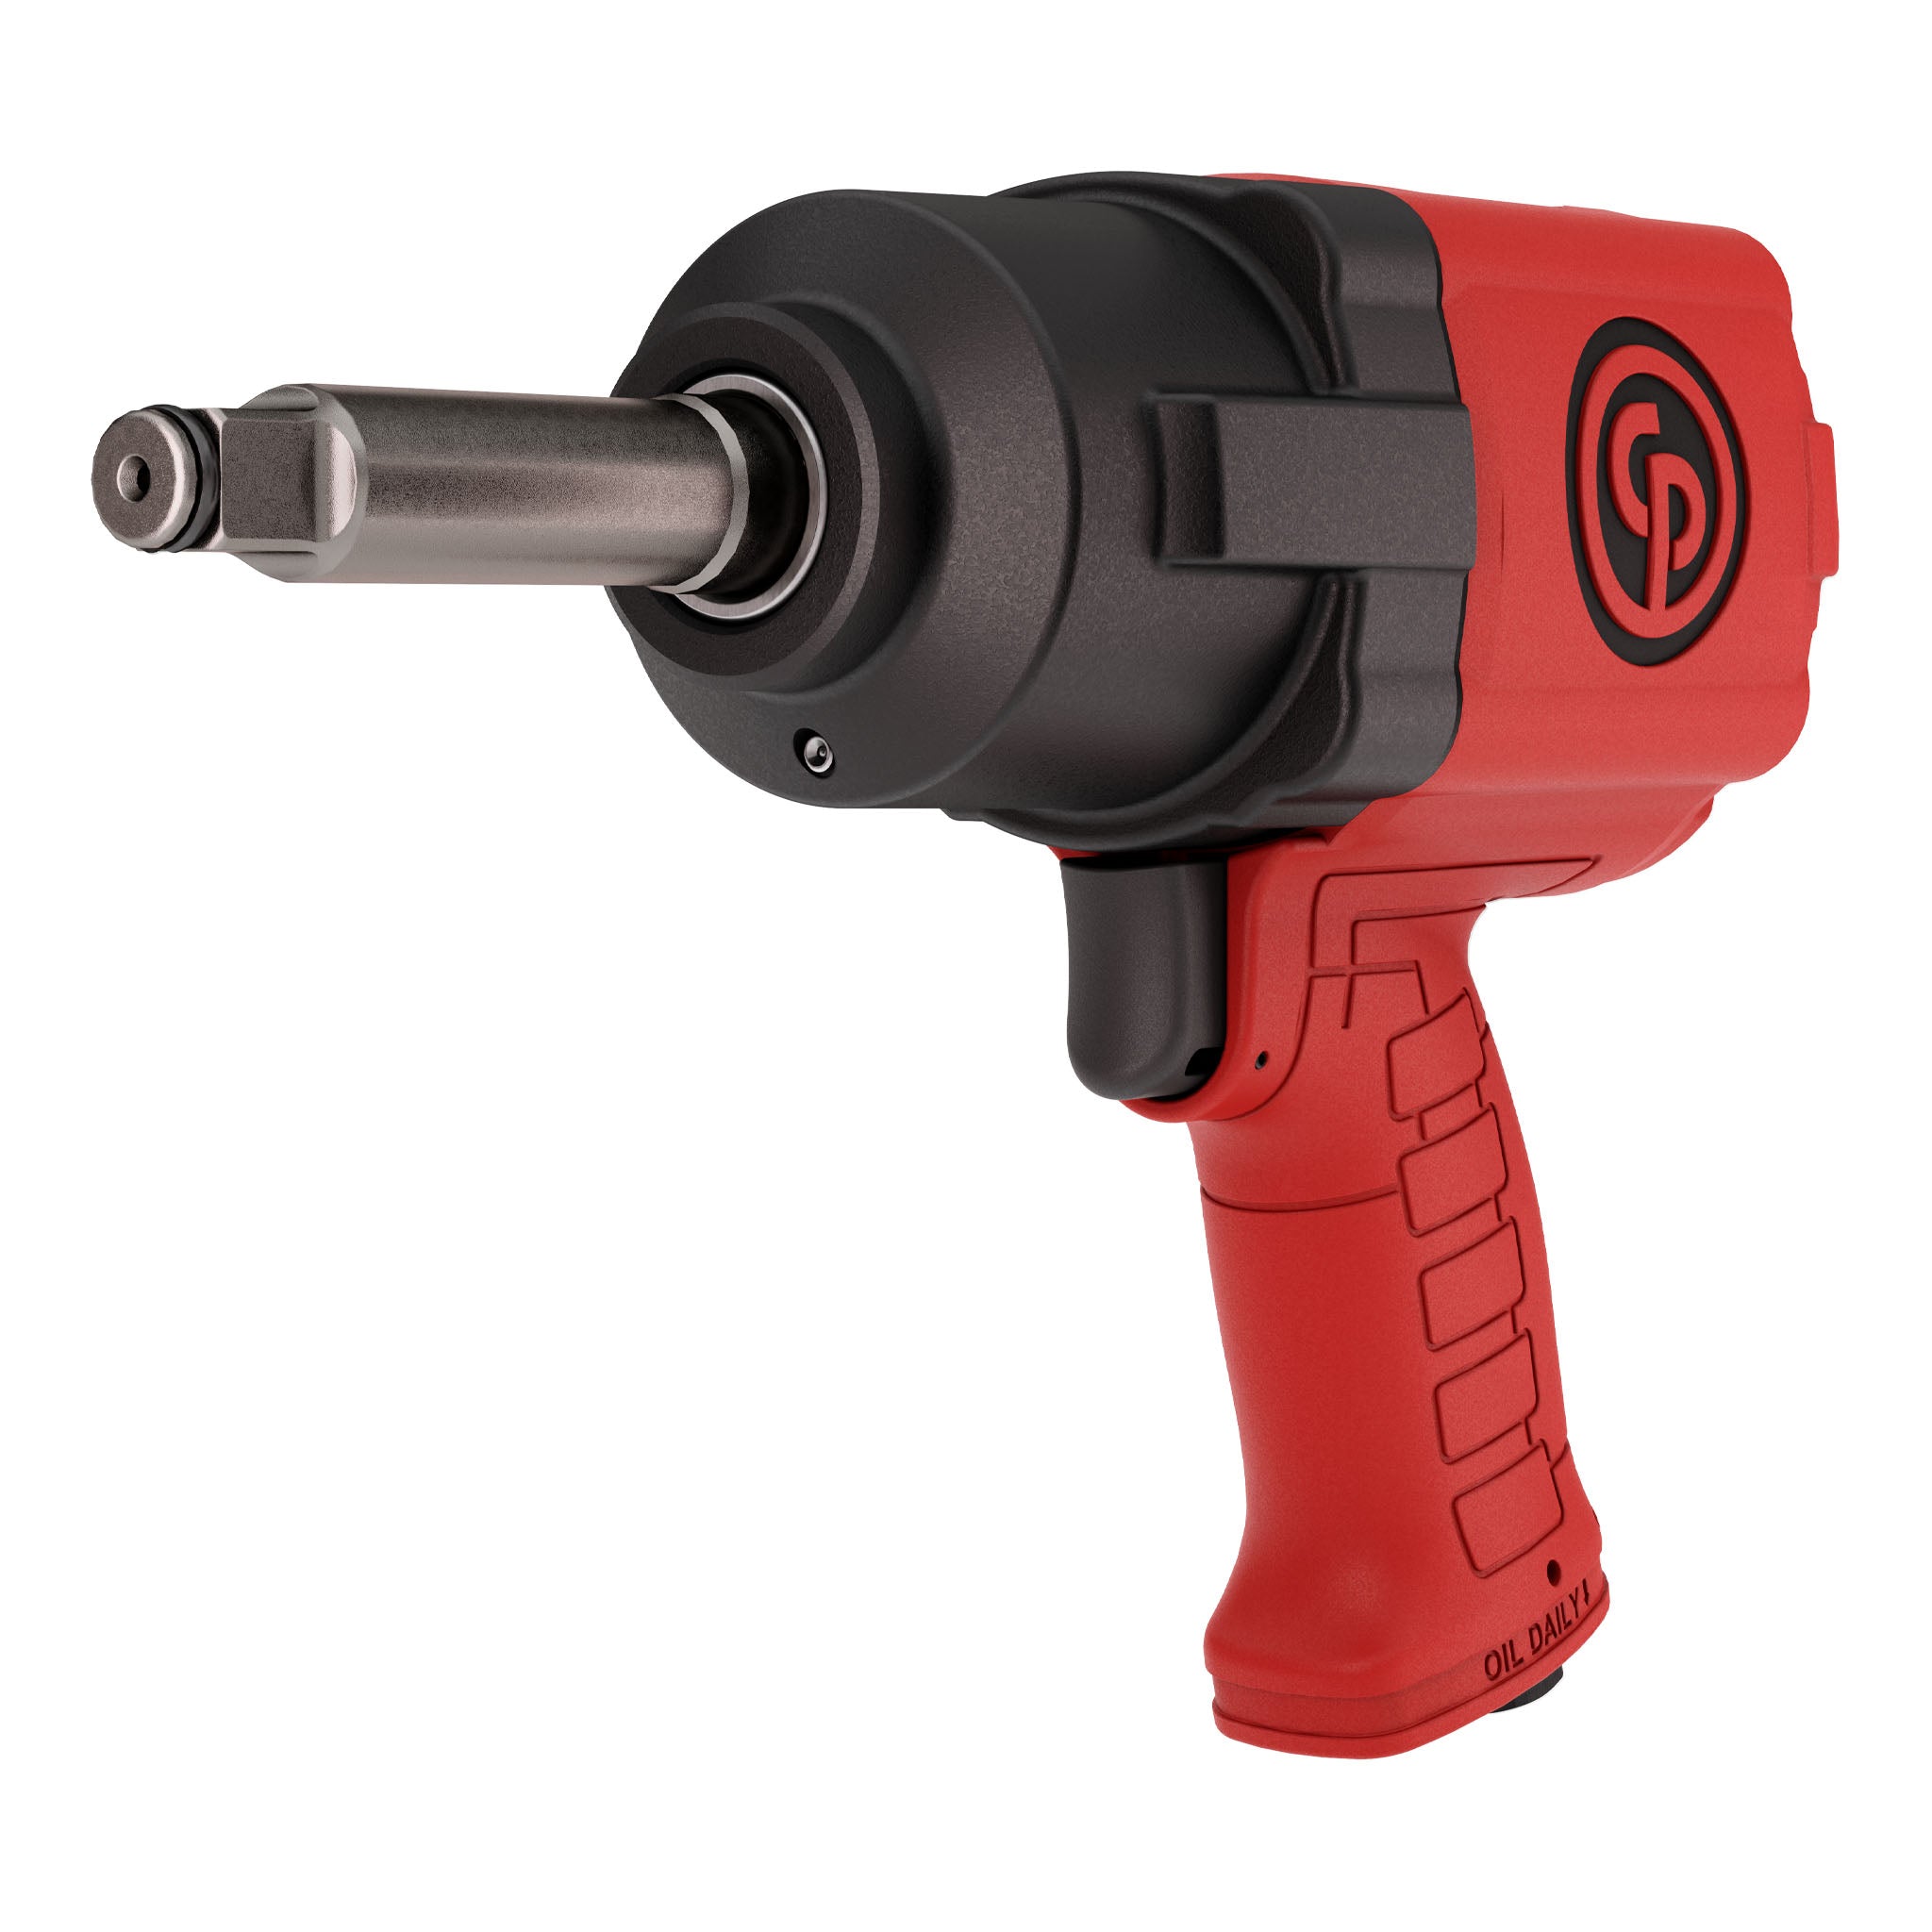 Chicago Pneumatic 1/2" Impact Wrench - CP-7741-2